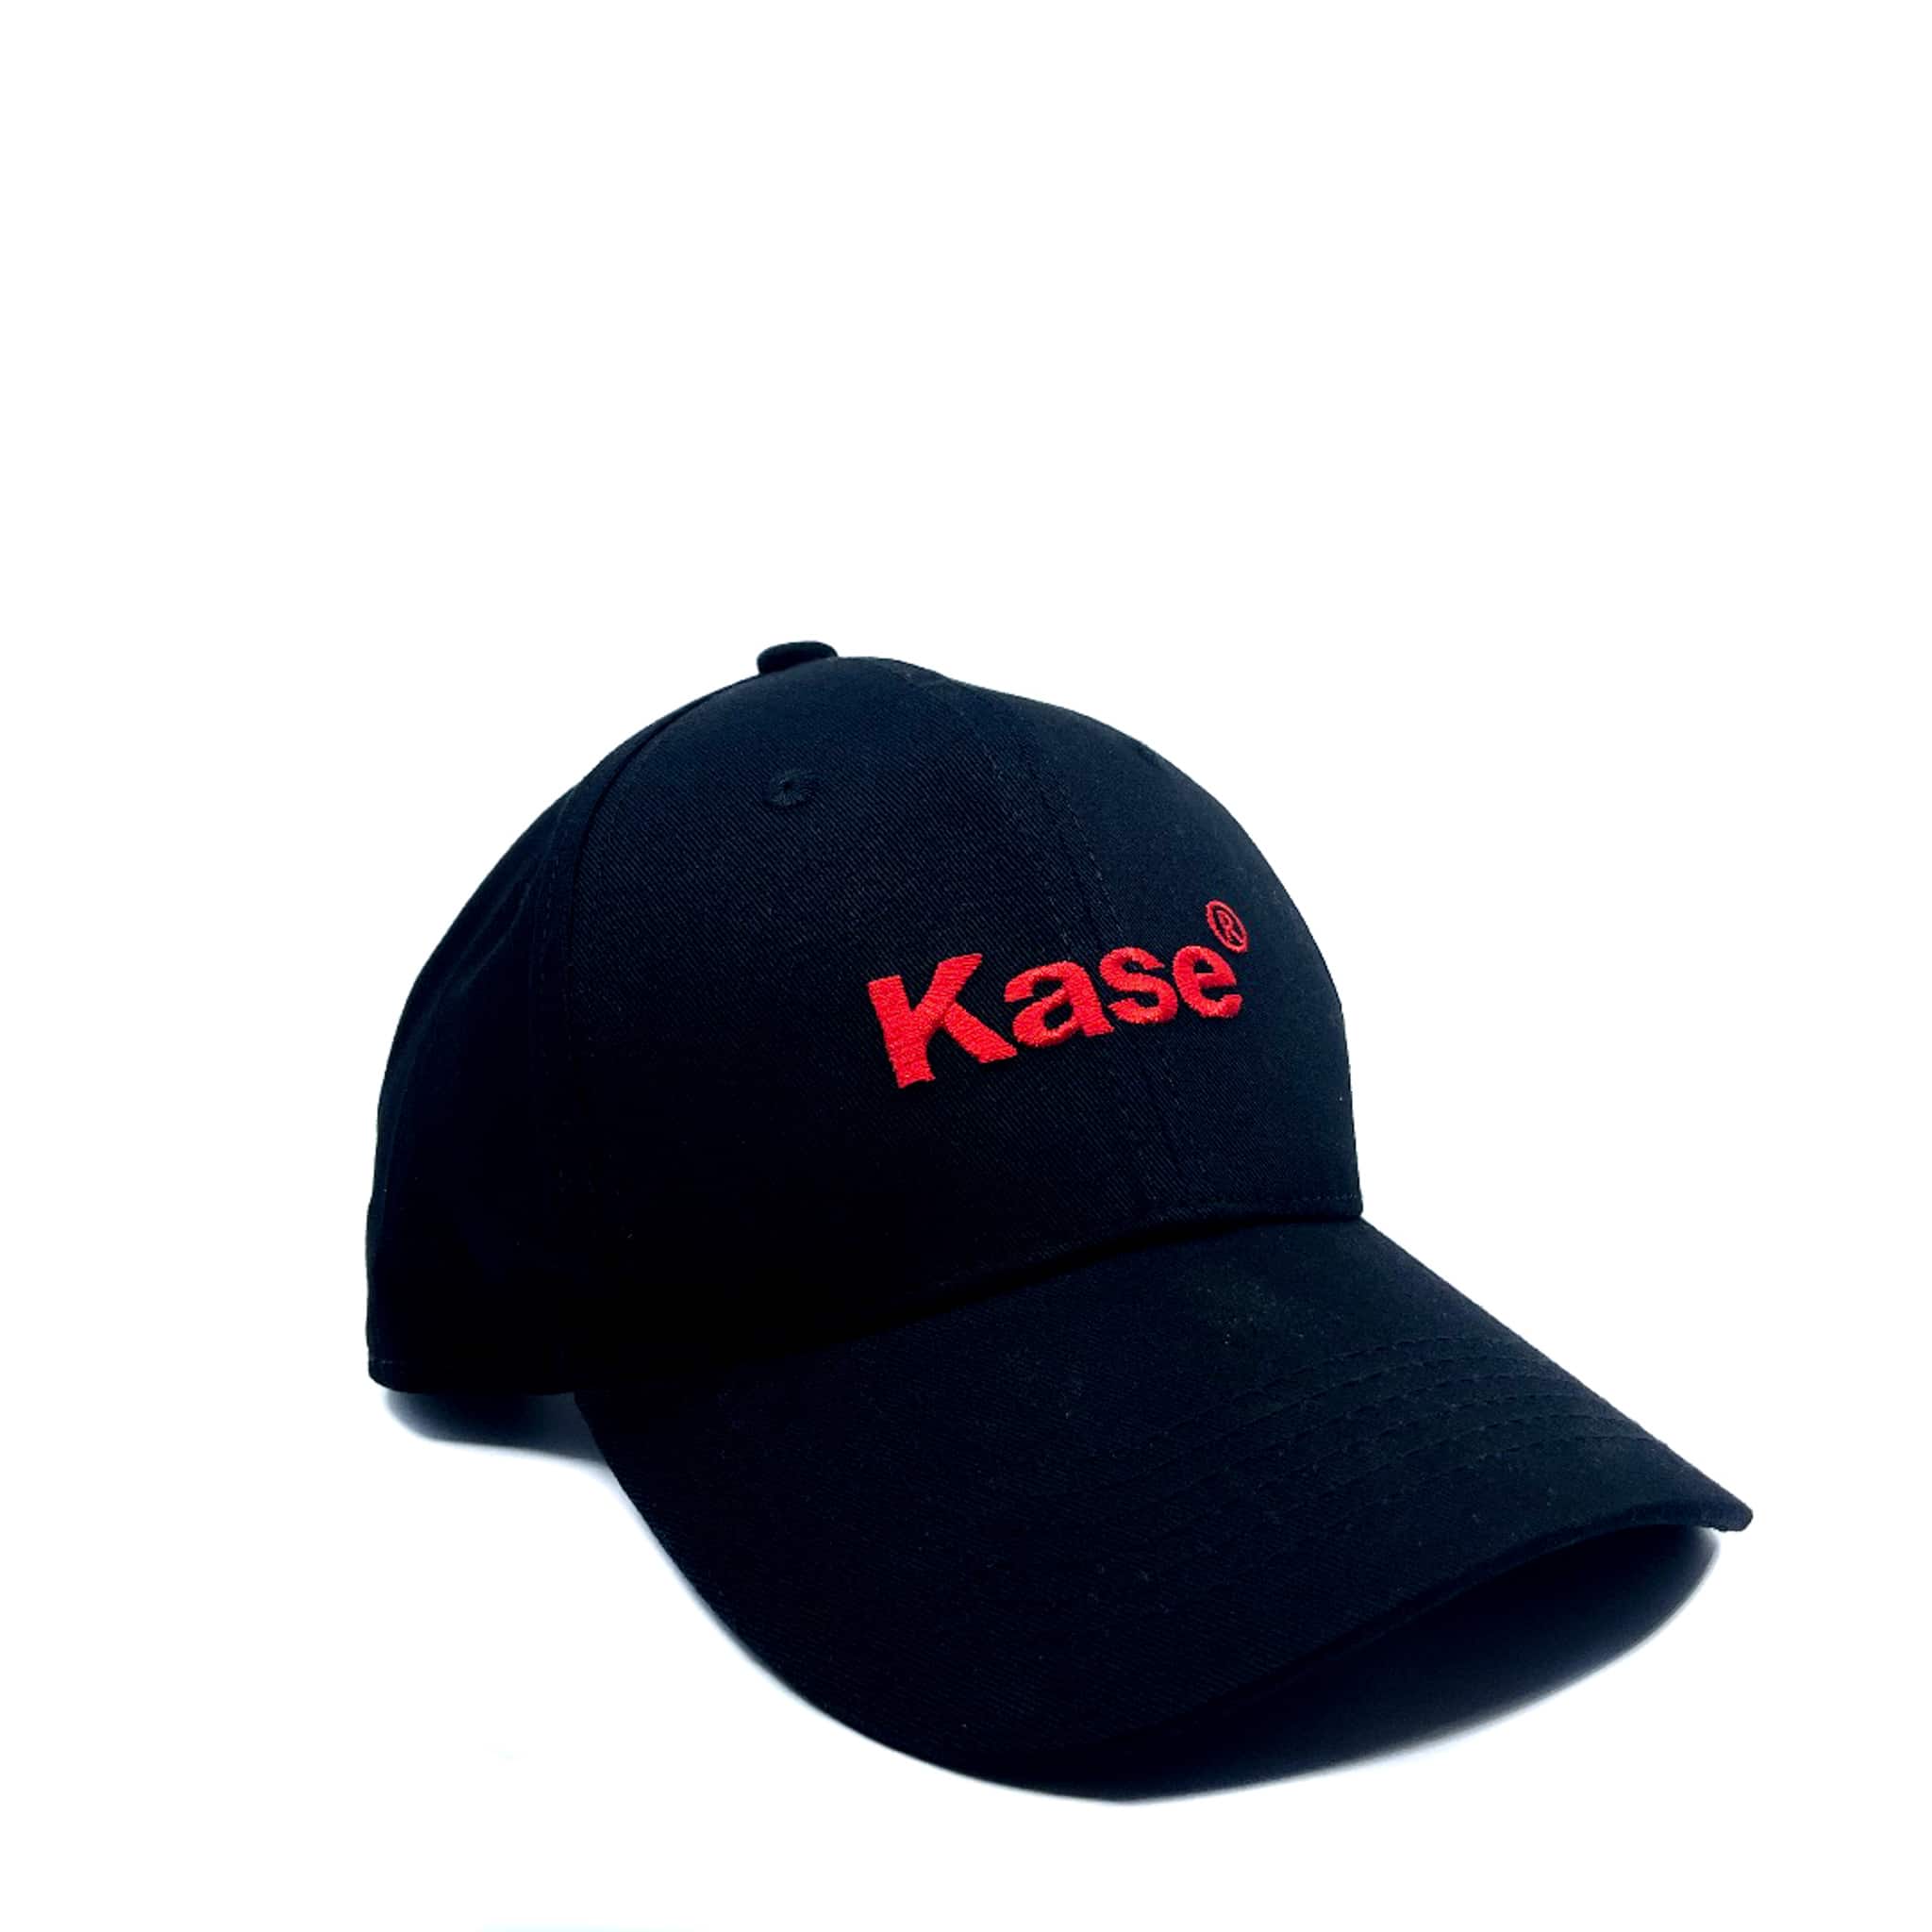 Base Cap with classic shape and embroidery "Kase"